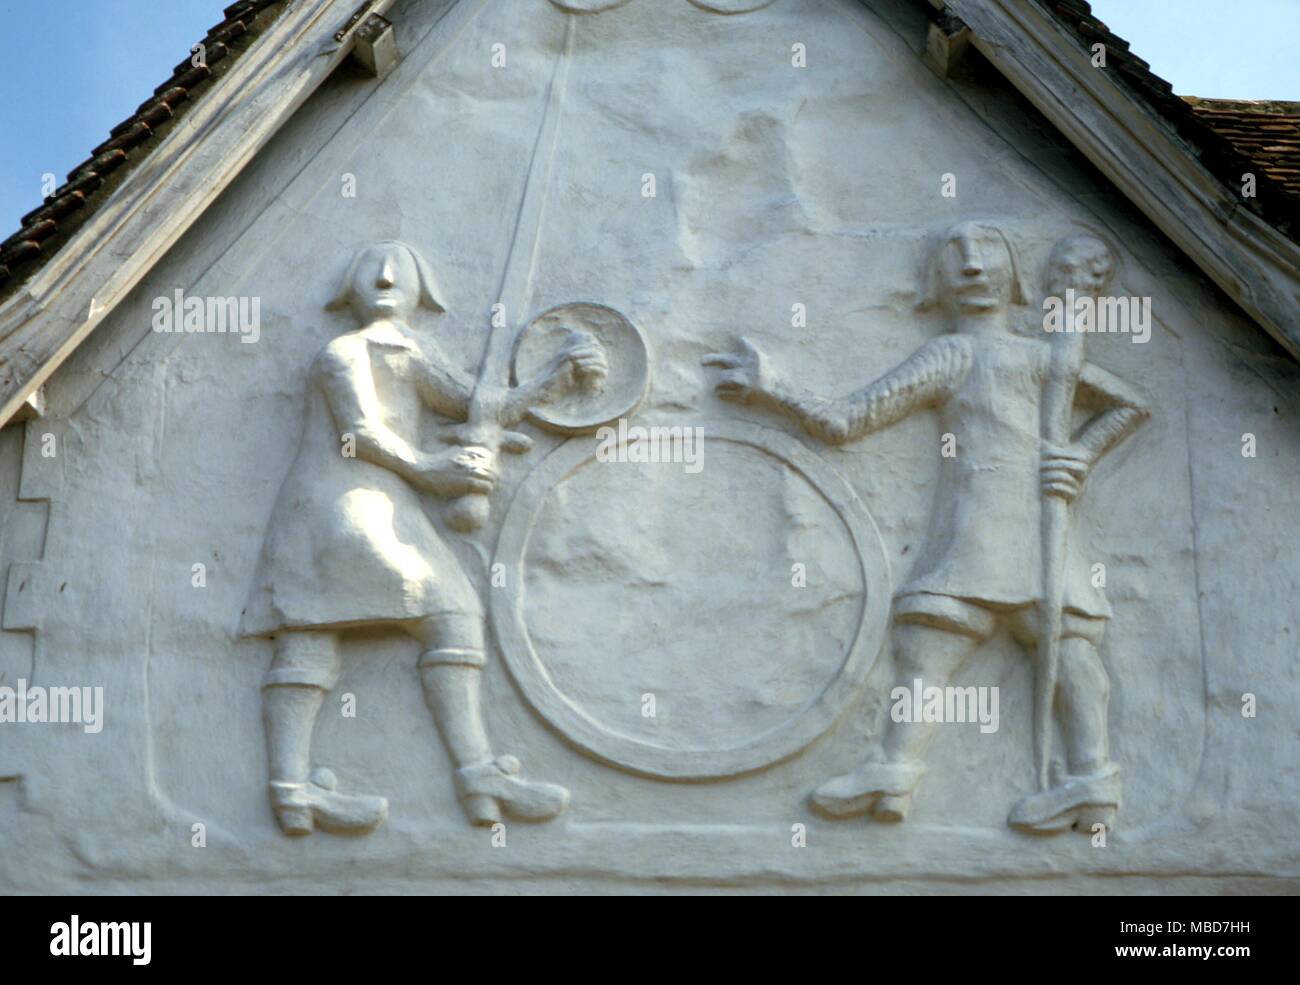 GIANT Gog and Magog. The giant heroes, Gog and Magog, in pargetting on the facade of the old Sun Inn, Saffron Walden. The fall of the sunlight on these figures reveal various hidden symbols Stock Photo